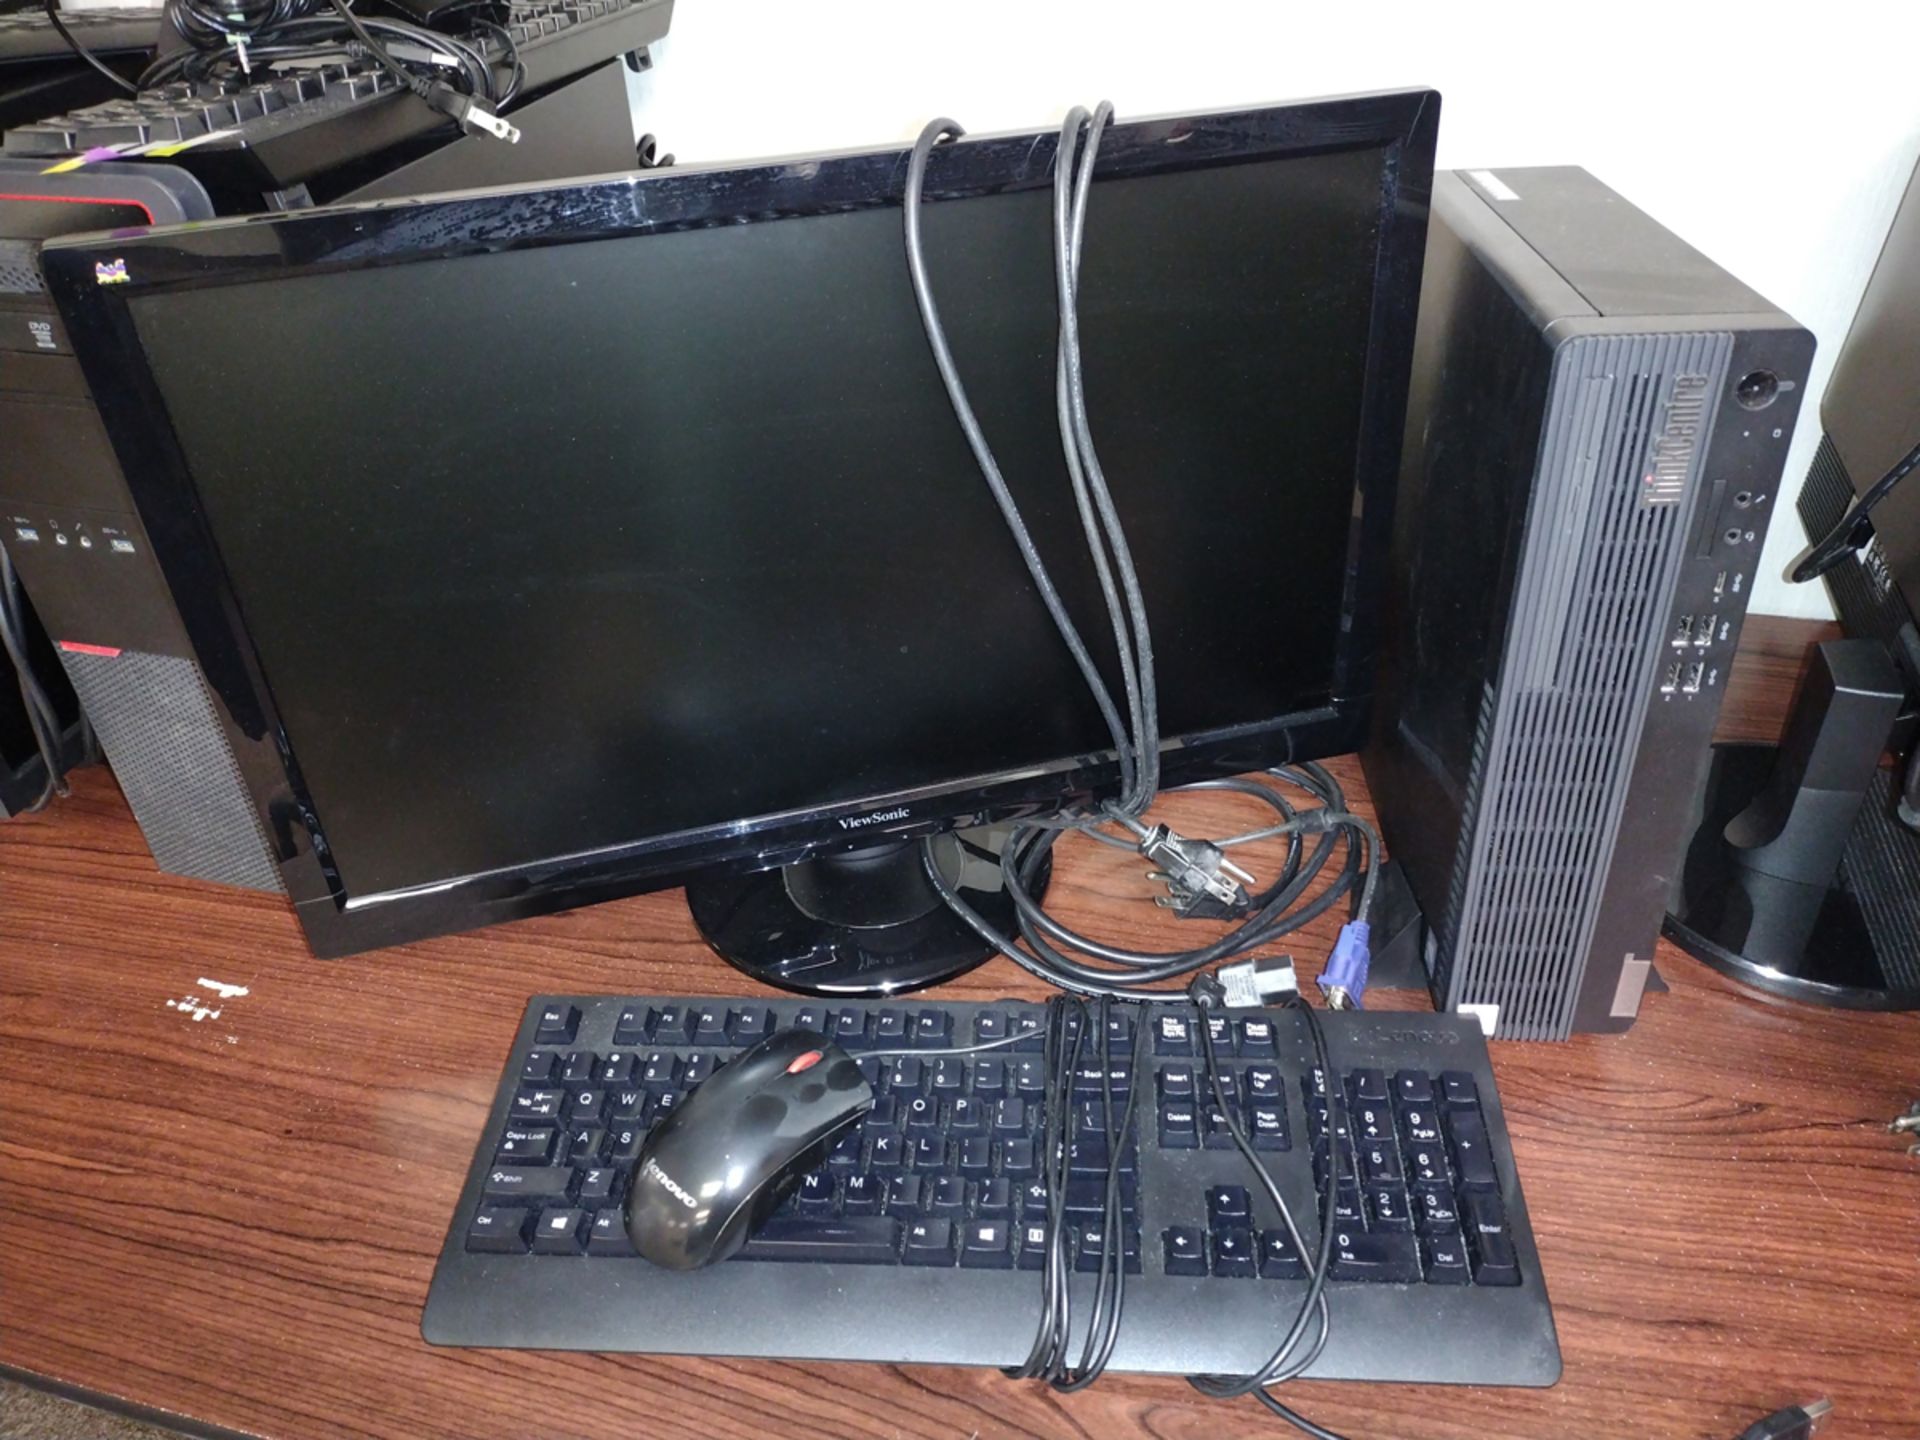 Lenovo M80S ThinkCentre i5 PC w/ Monitor and Keyboard